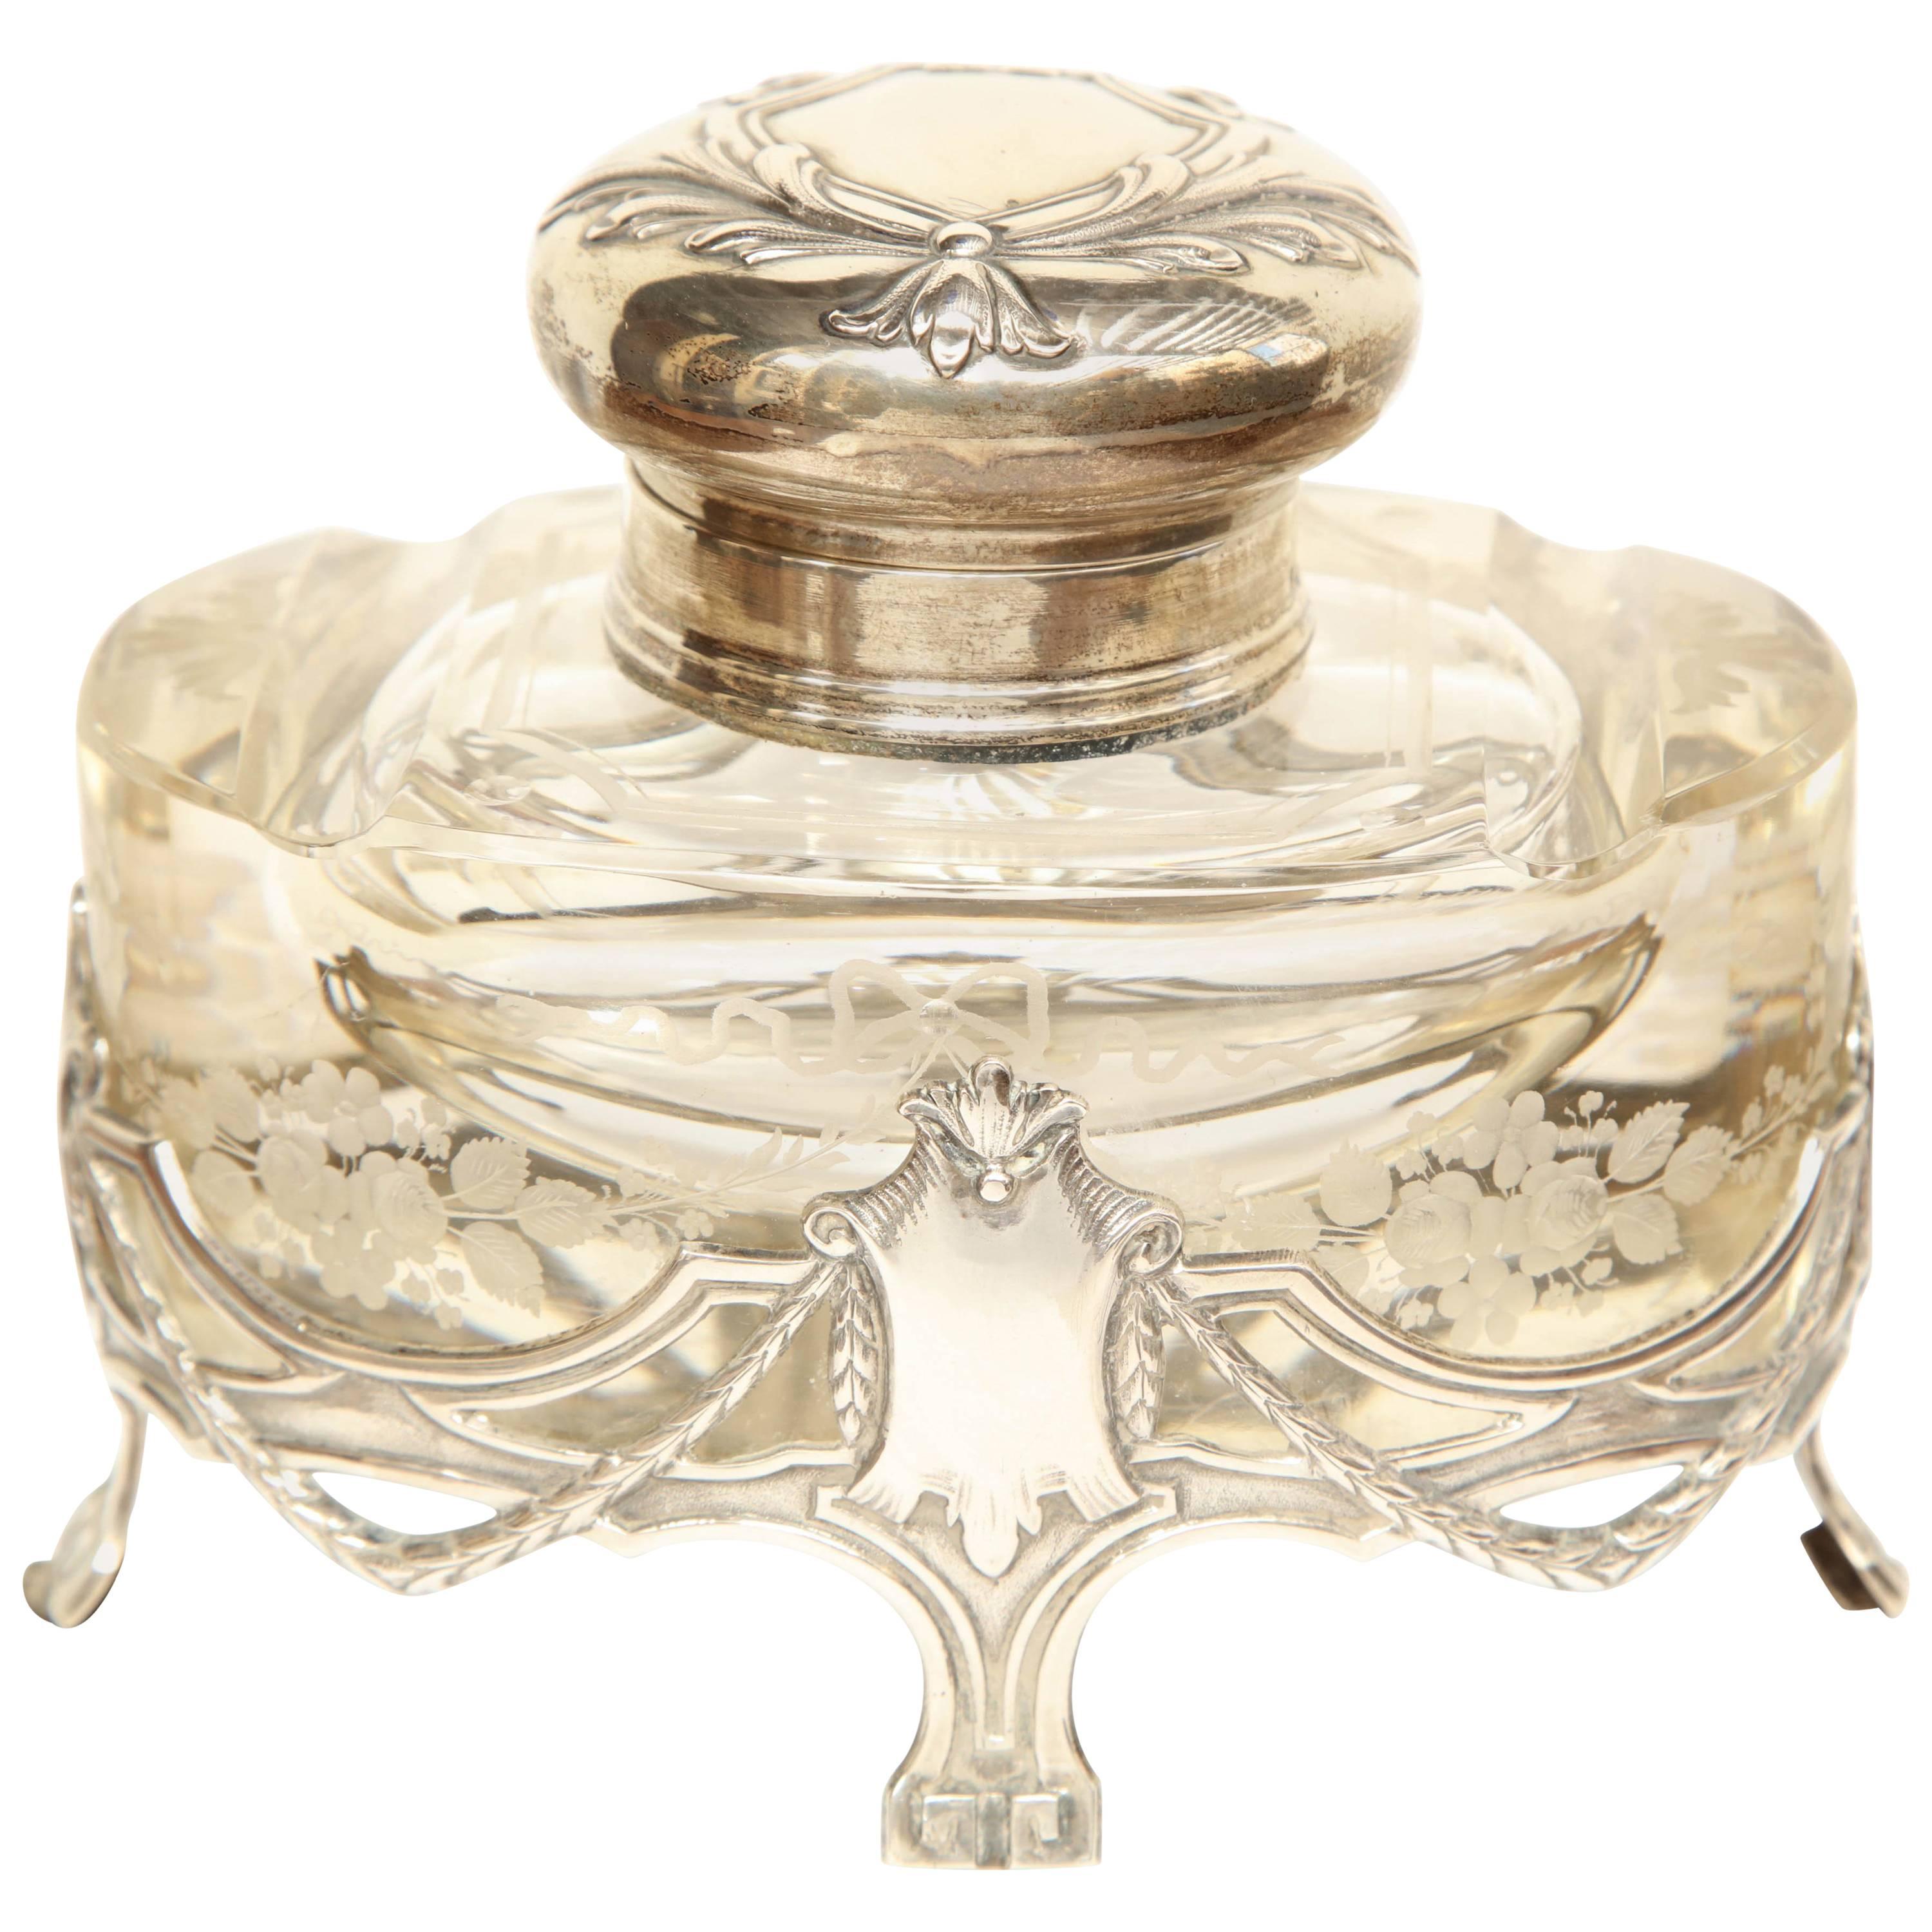 Early 20th Century Art Nouveau German Silver and Glass Inkwell For Sale